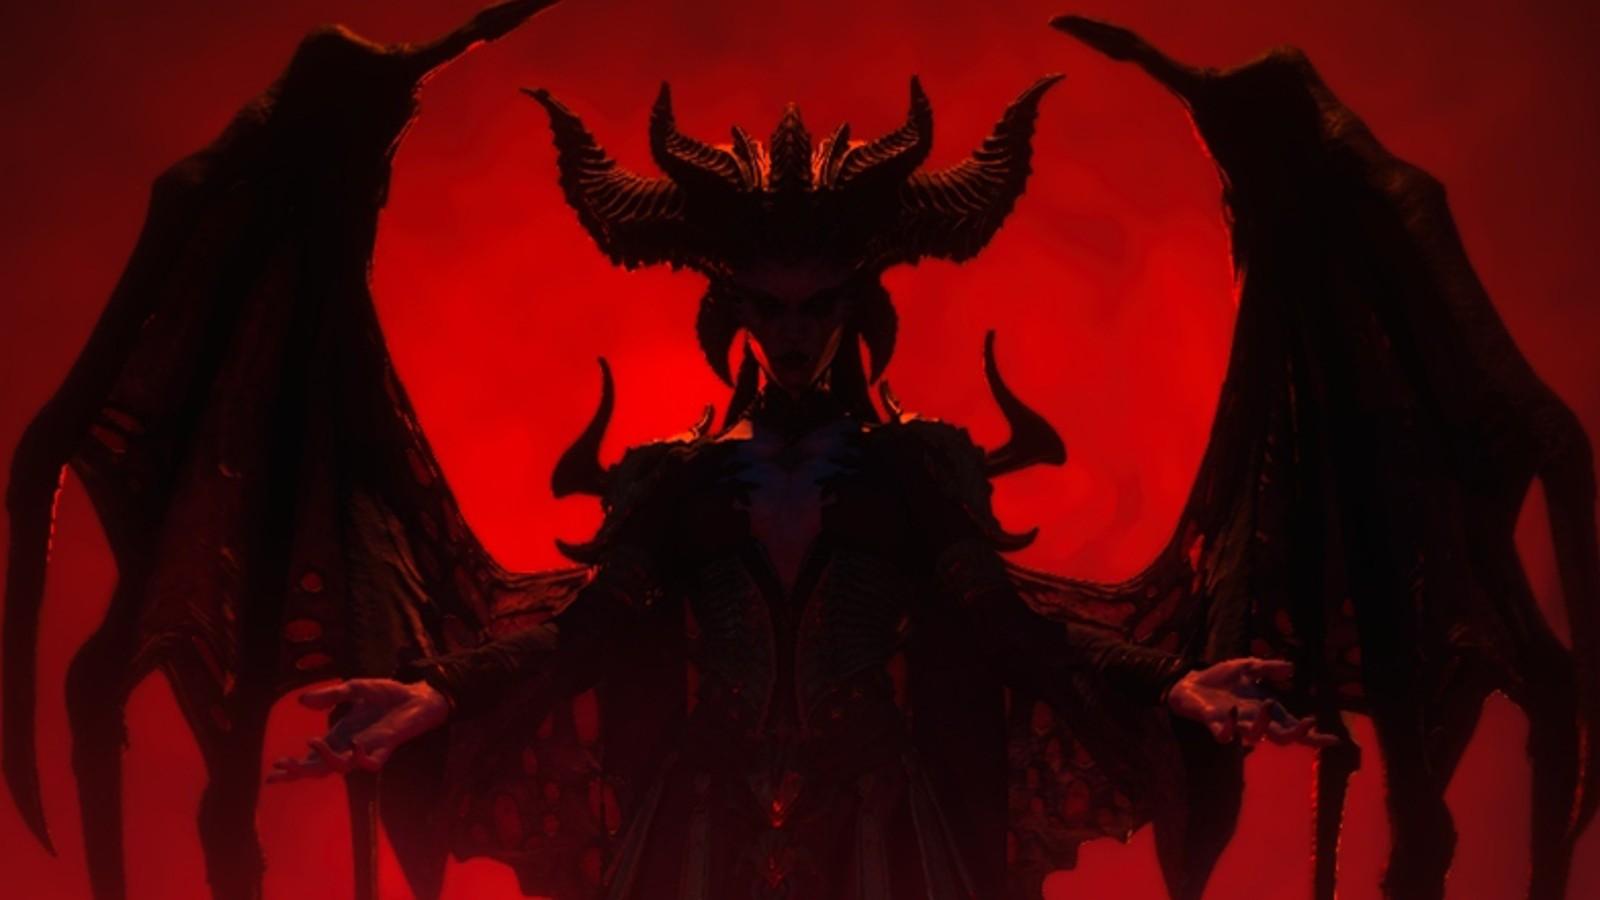 A promotional image from Diablo 4, a game which soundtrack has just been released.